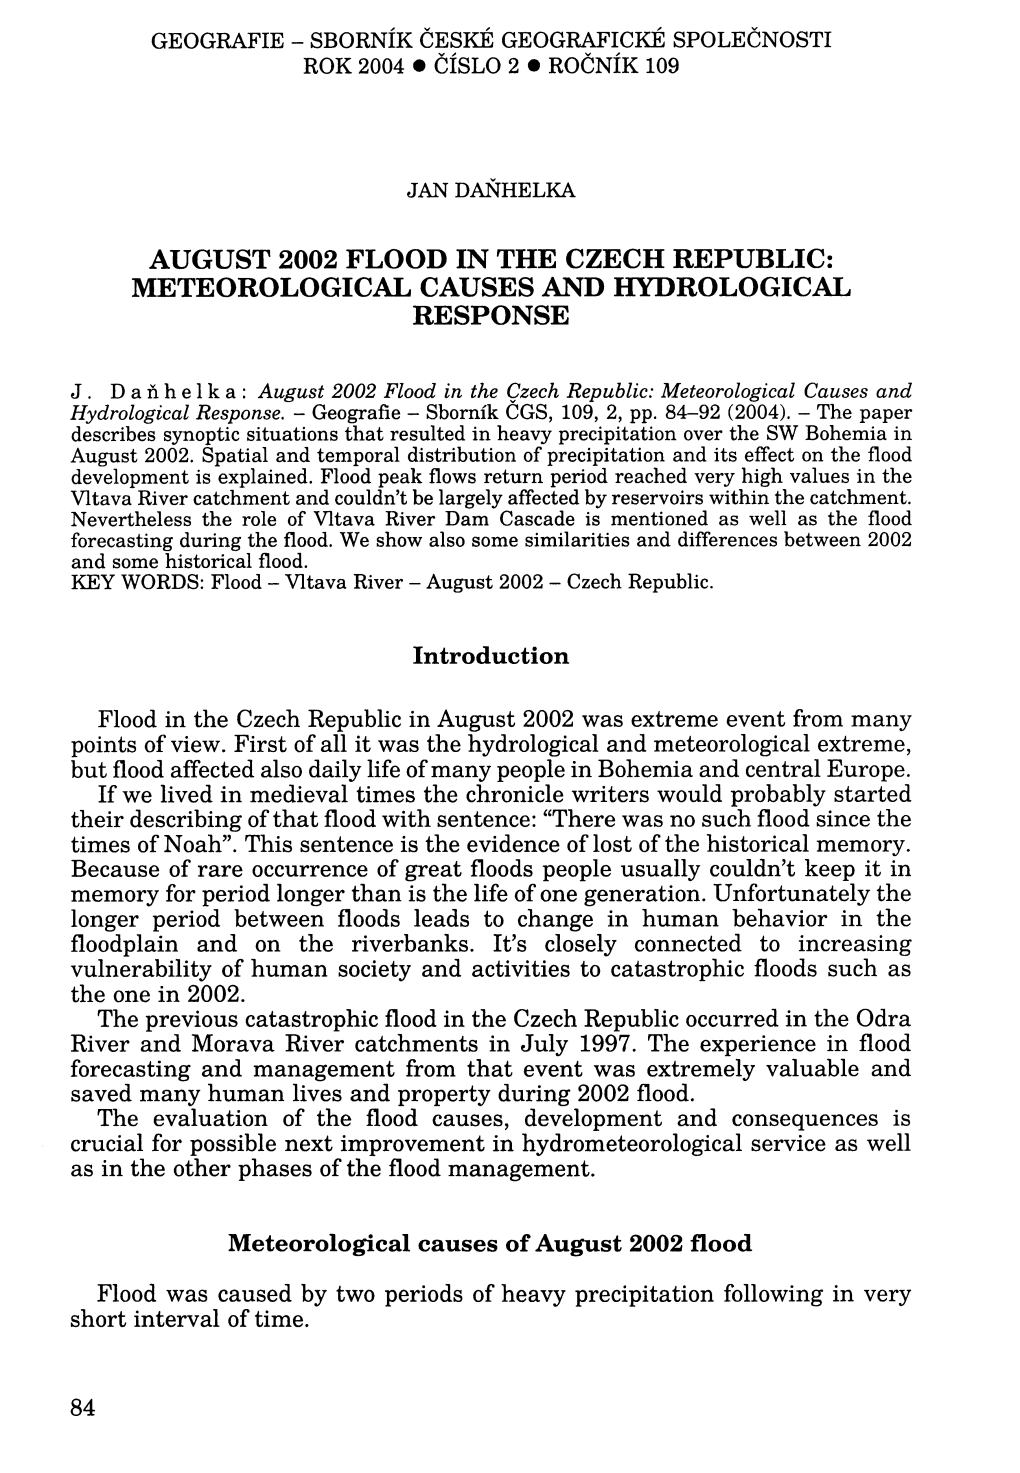 August 2002 Flood in the Czech Republic: Meteorological Causes and Hydrological Response